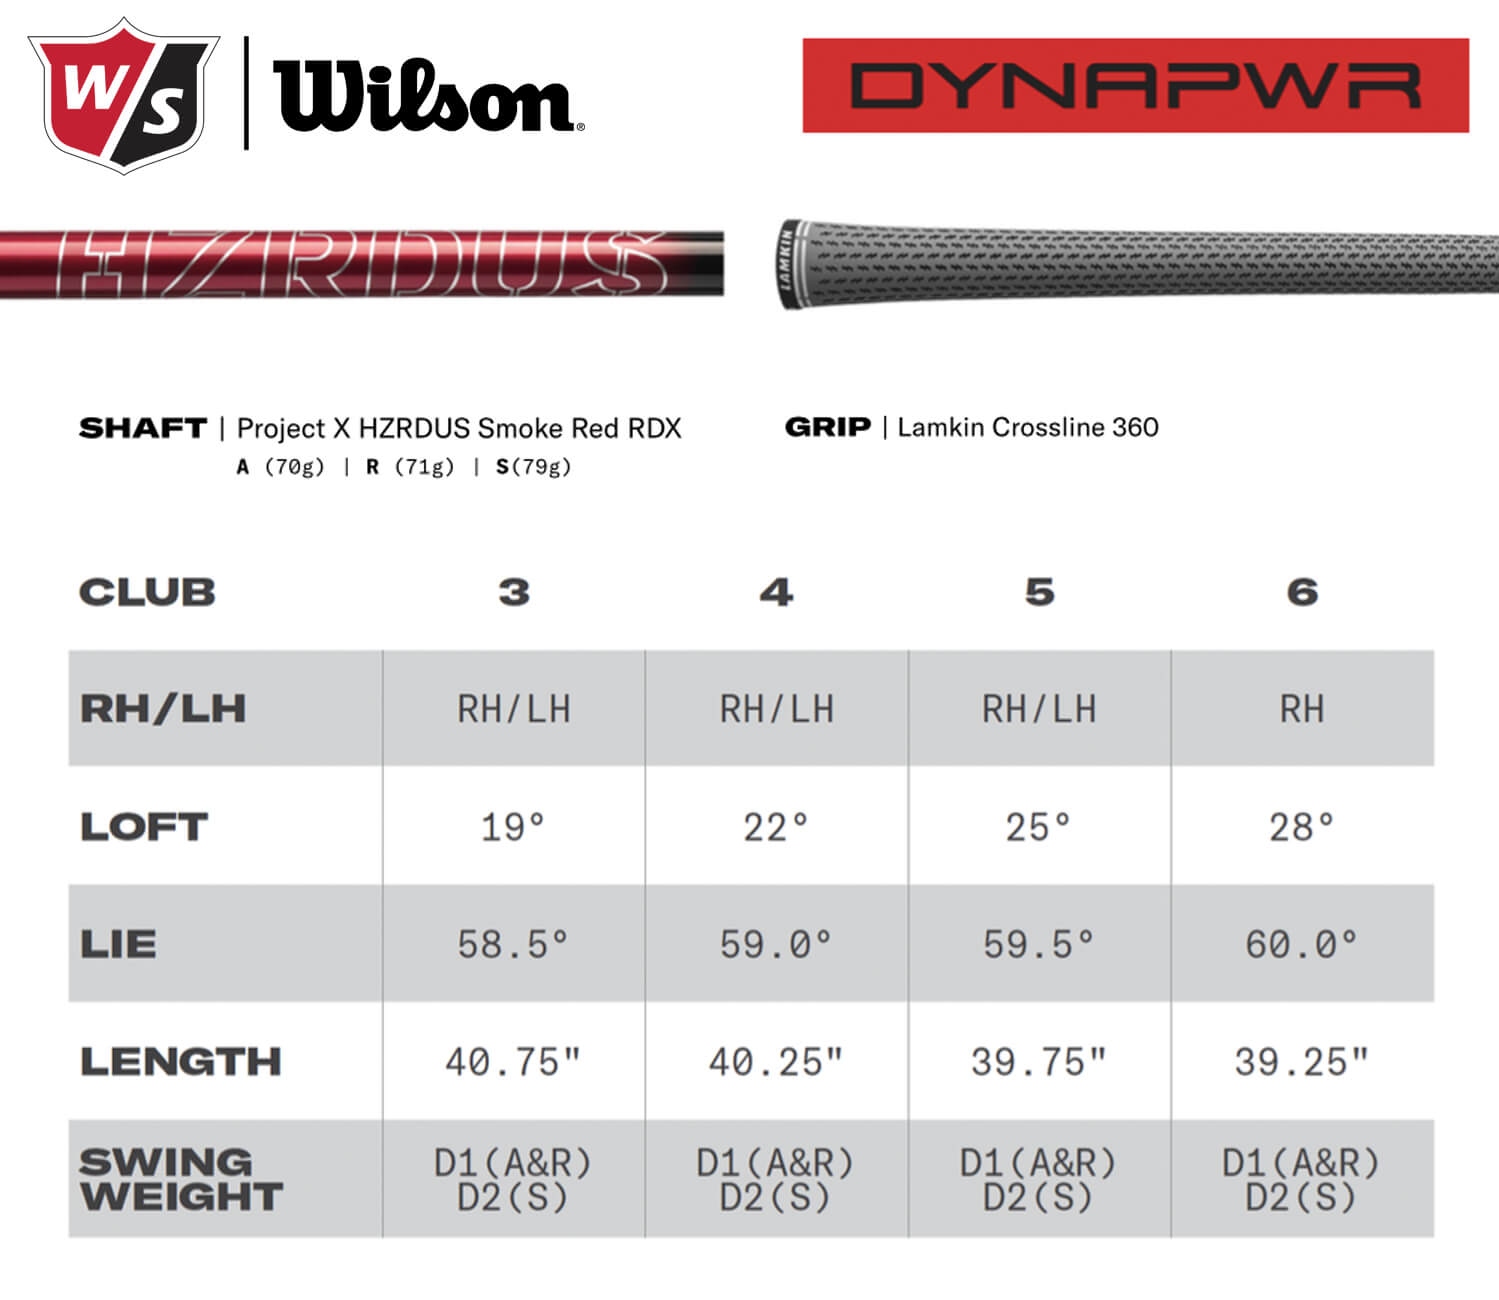 Specification for Wilson Dynapower Golf Hybrids